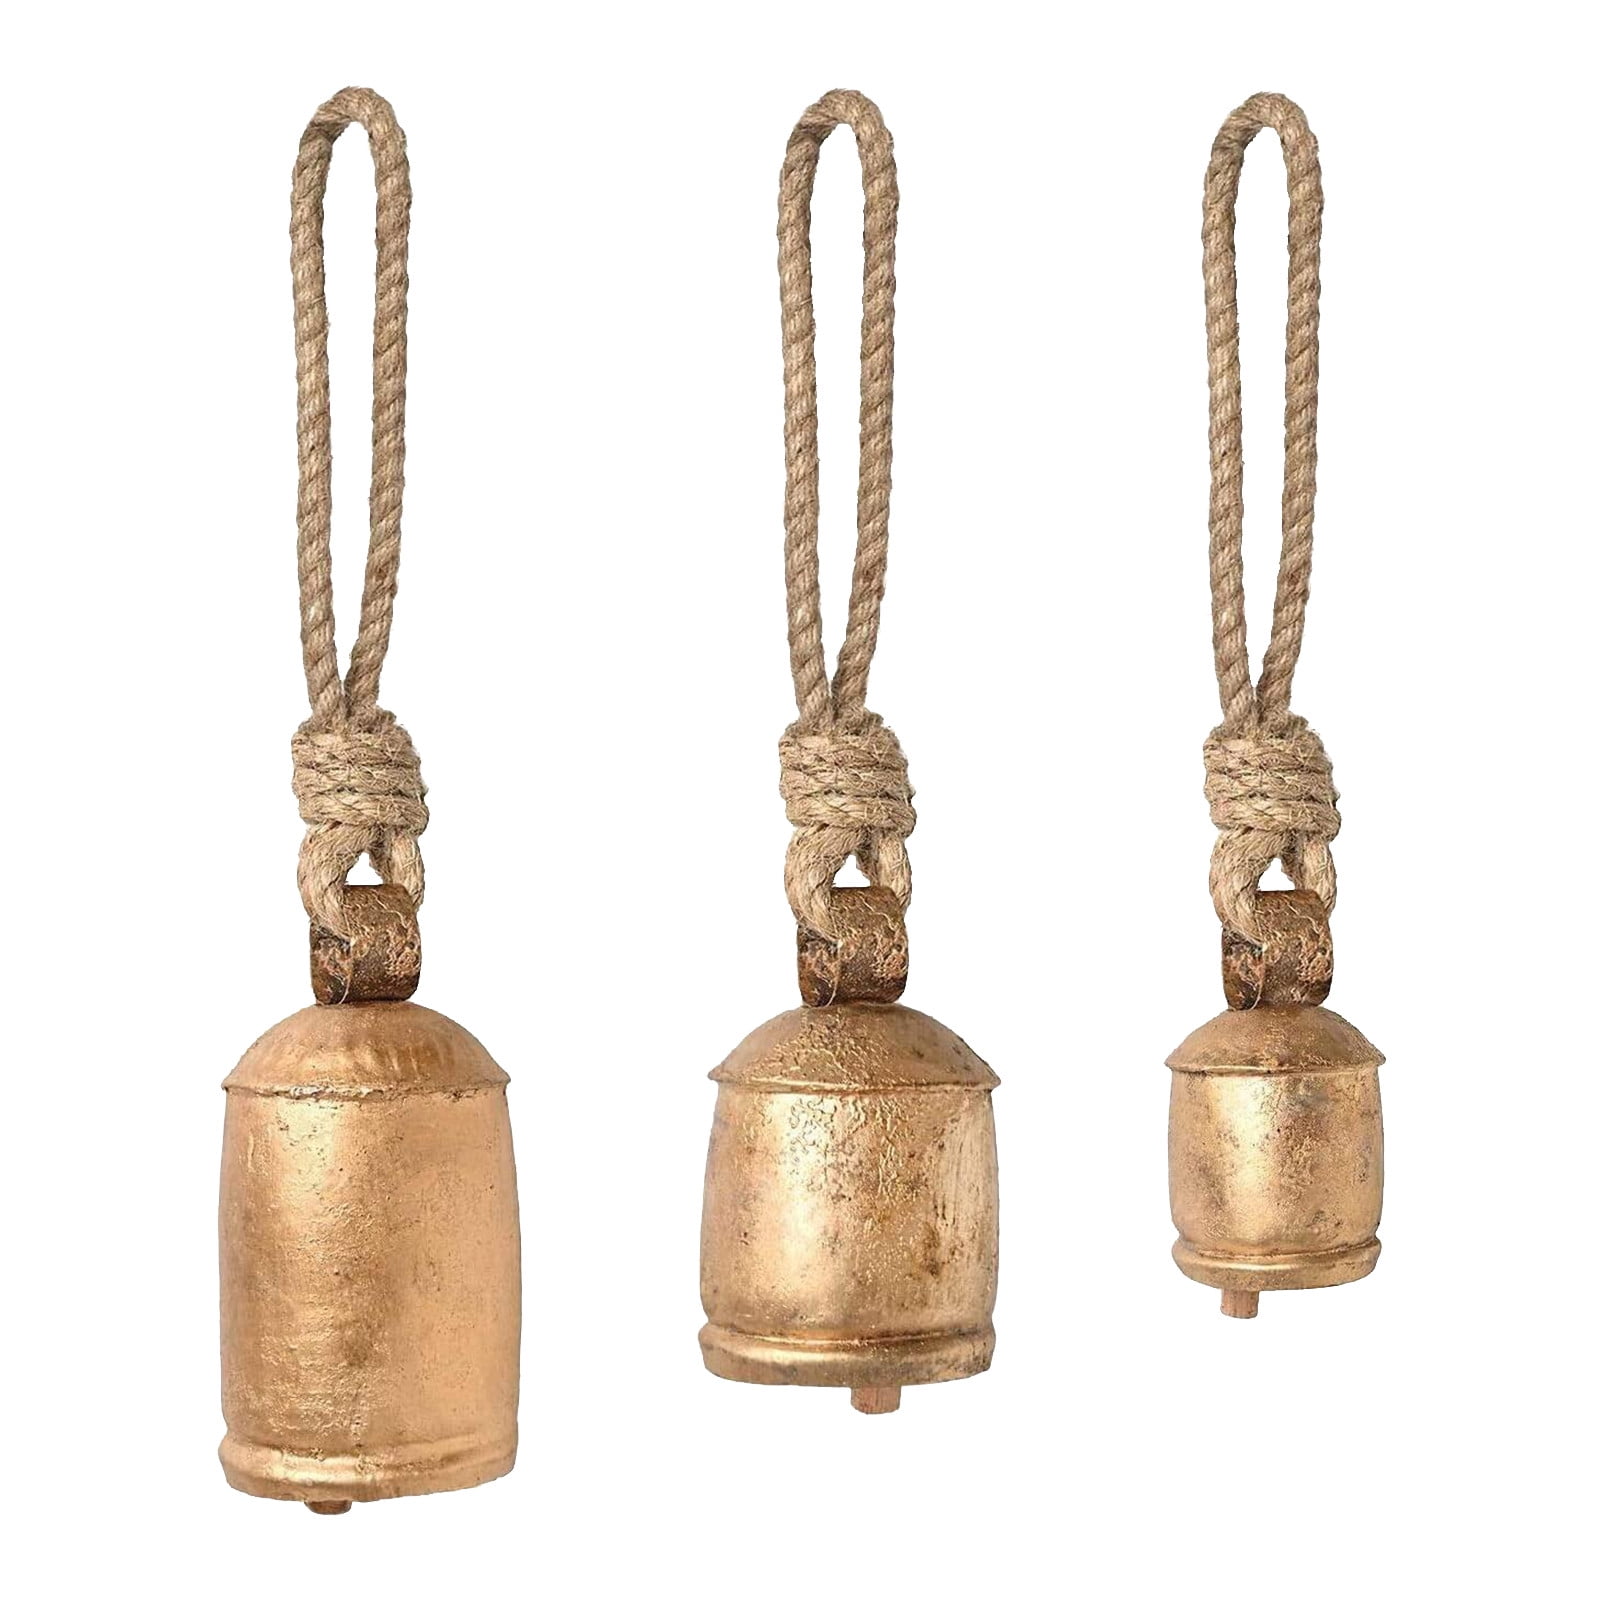 Rustic Cow Bells on Rope Set of 3 - 3, 4, 5 Tall - Paykoc